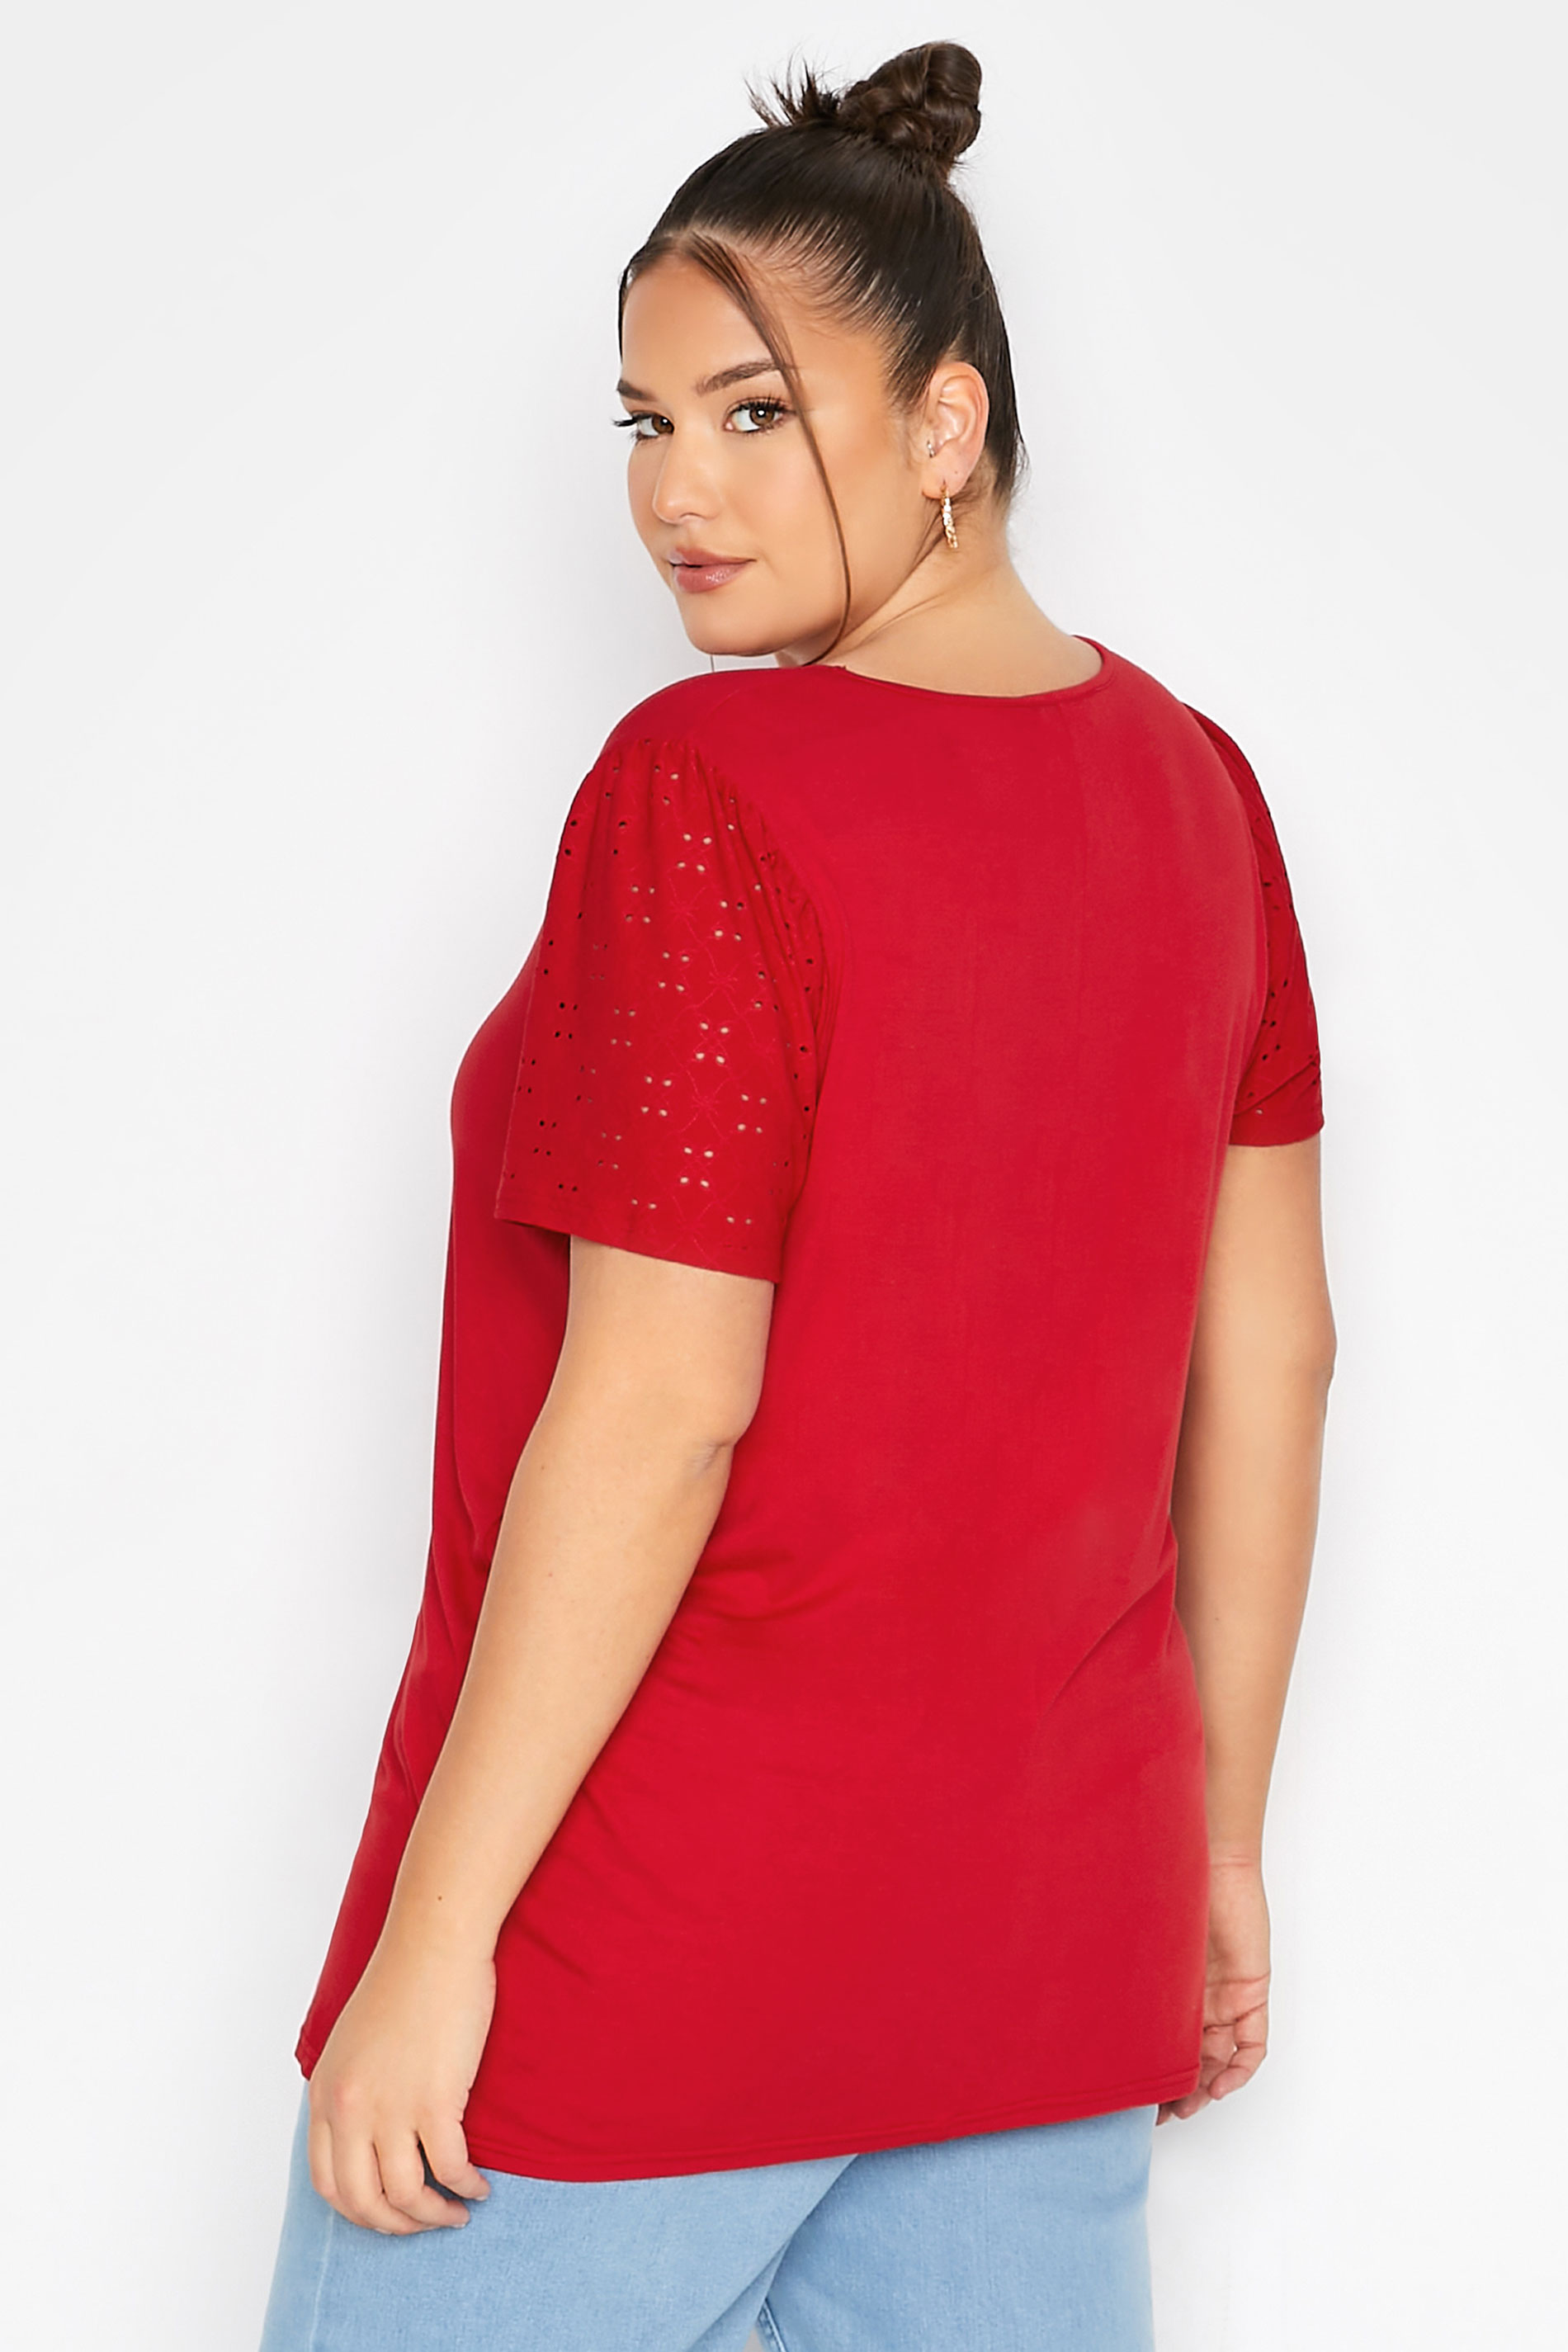 Grande taille  Tops Grande taille  T-Shirts | LIMITED COLLECTION - T-Shirt Rouge Manches Broderie Anglaise - UO79176